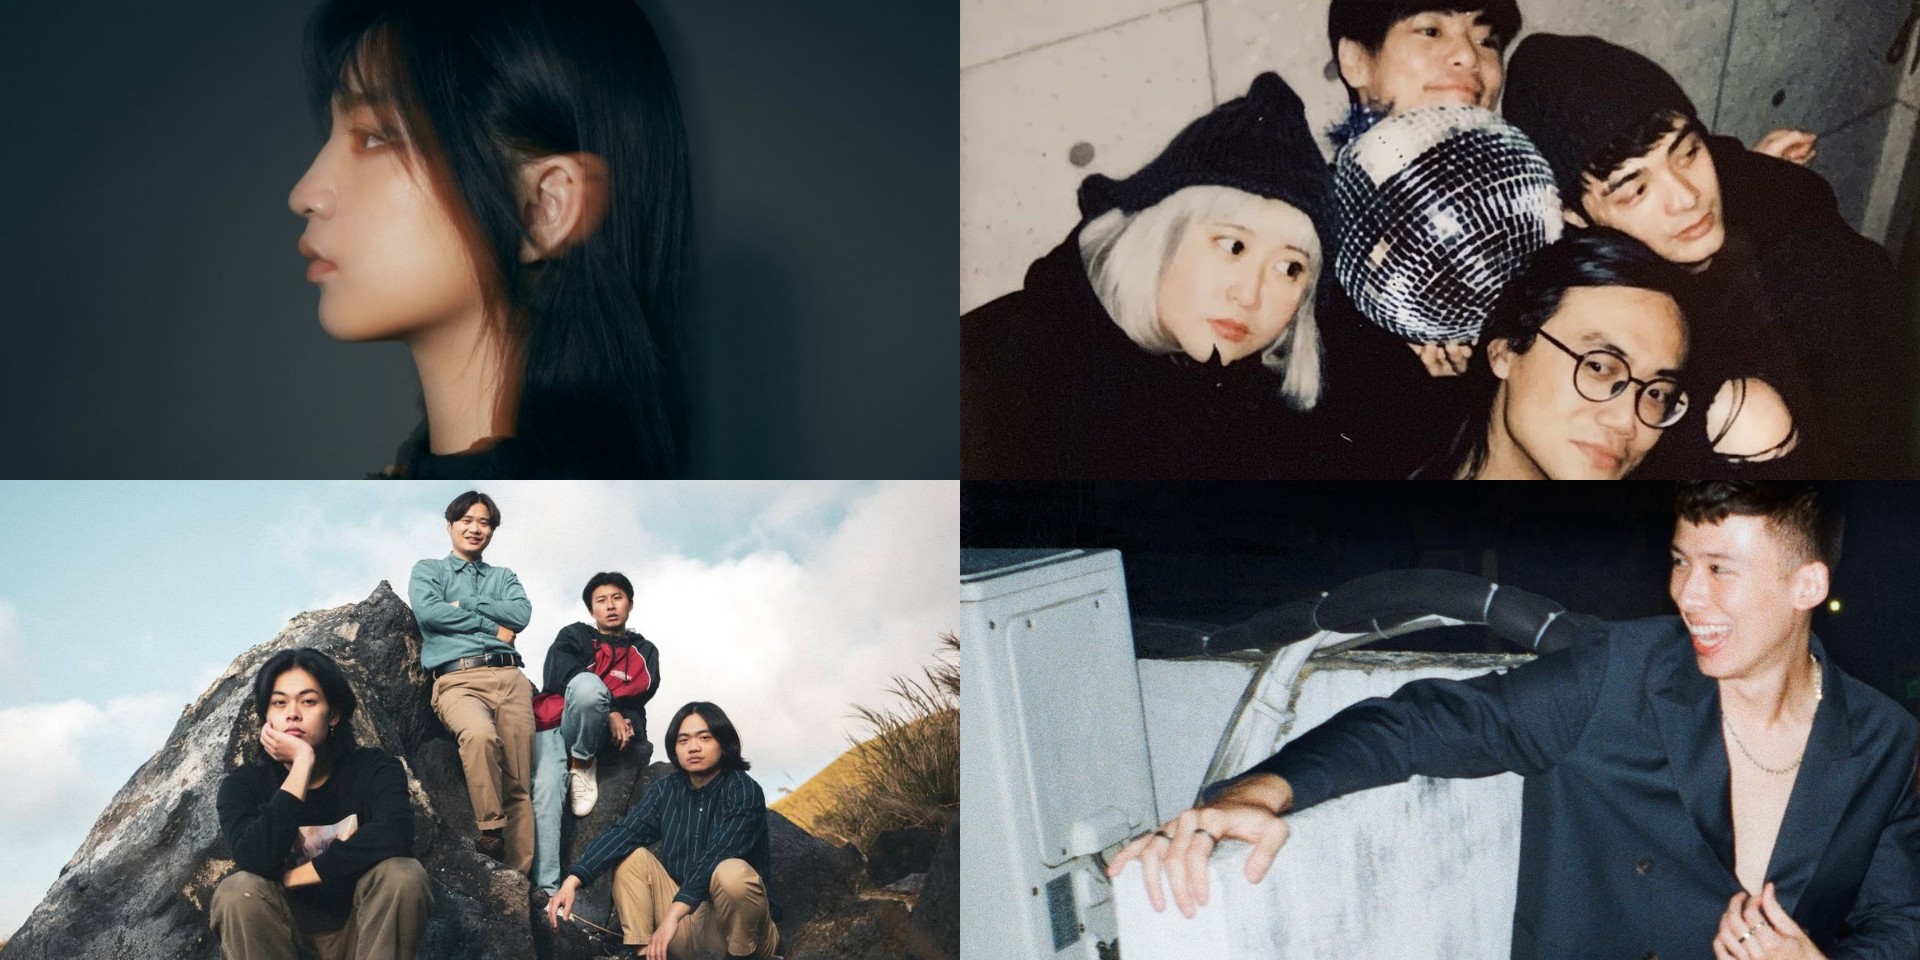 10 Taiwanese artists you need to check out – Han, Sandwich Fail, COLD DEW, NIO, and more